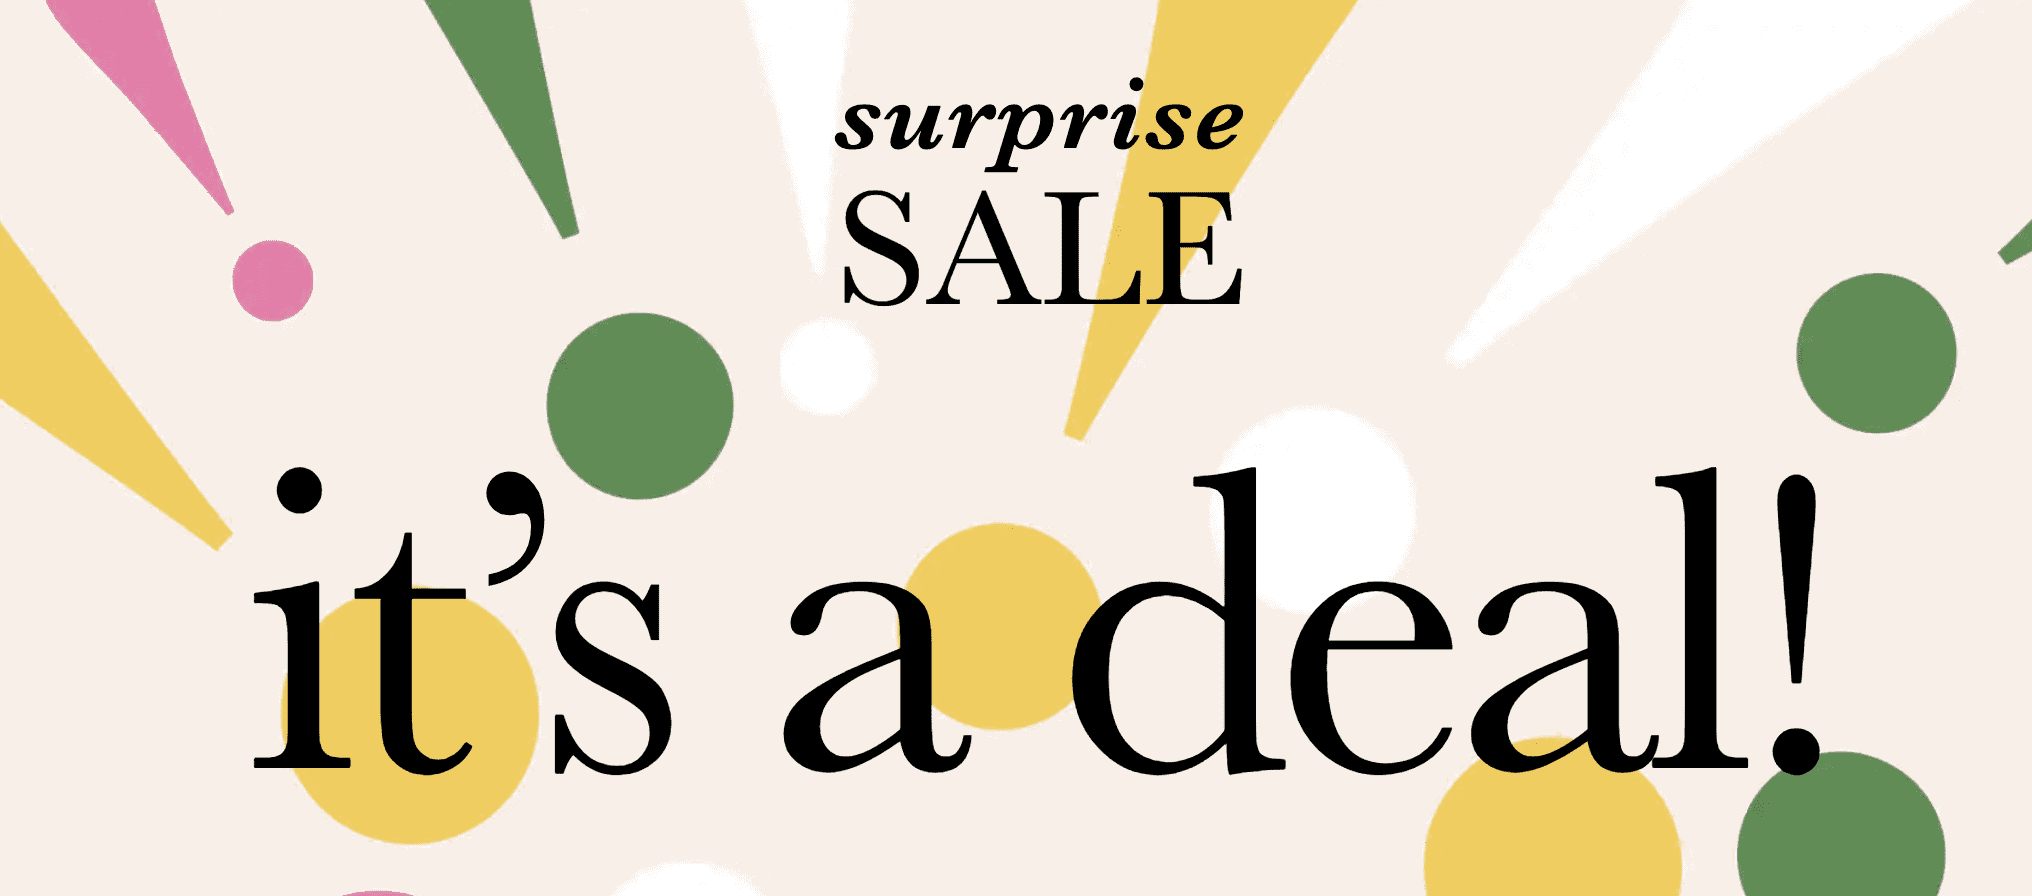 Kate Spade Surprise Sale: Save Big on the Best items